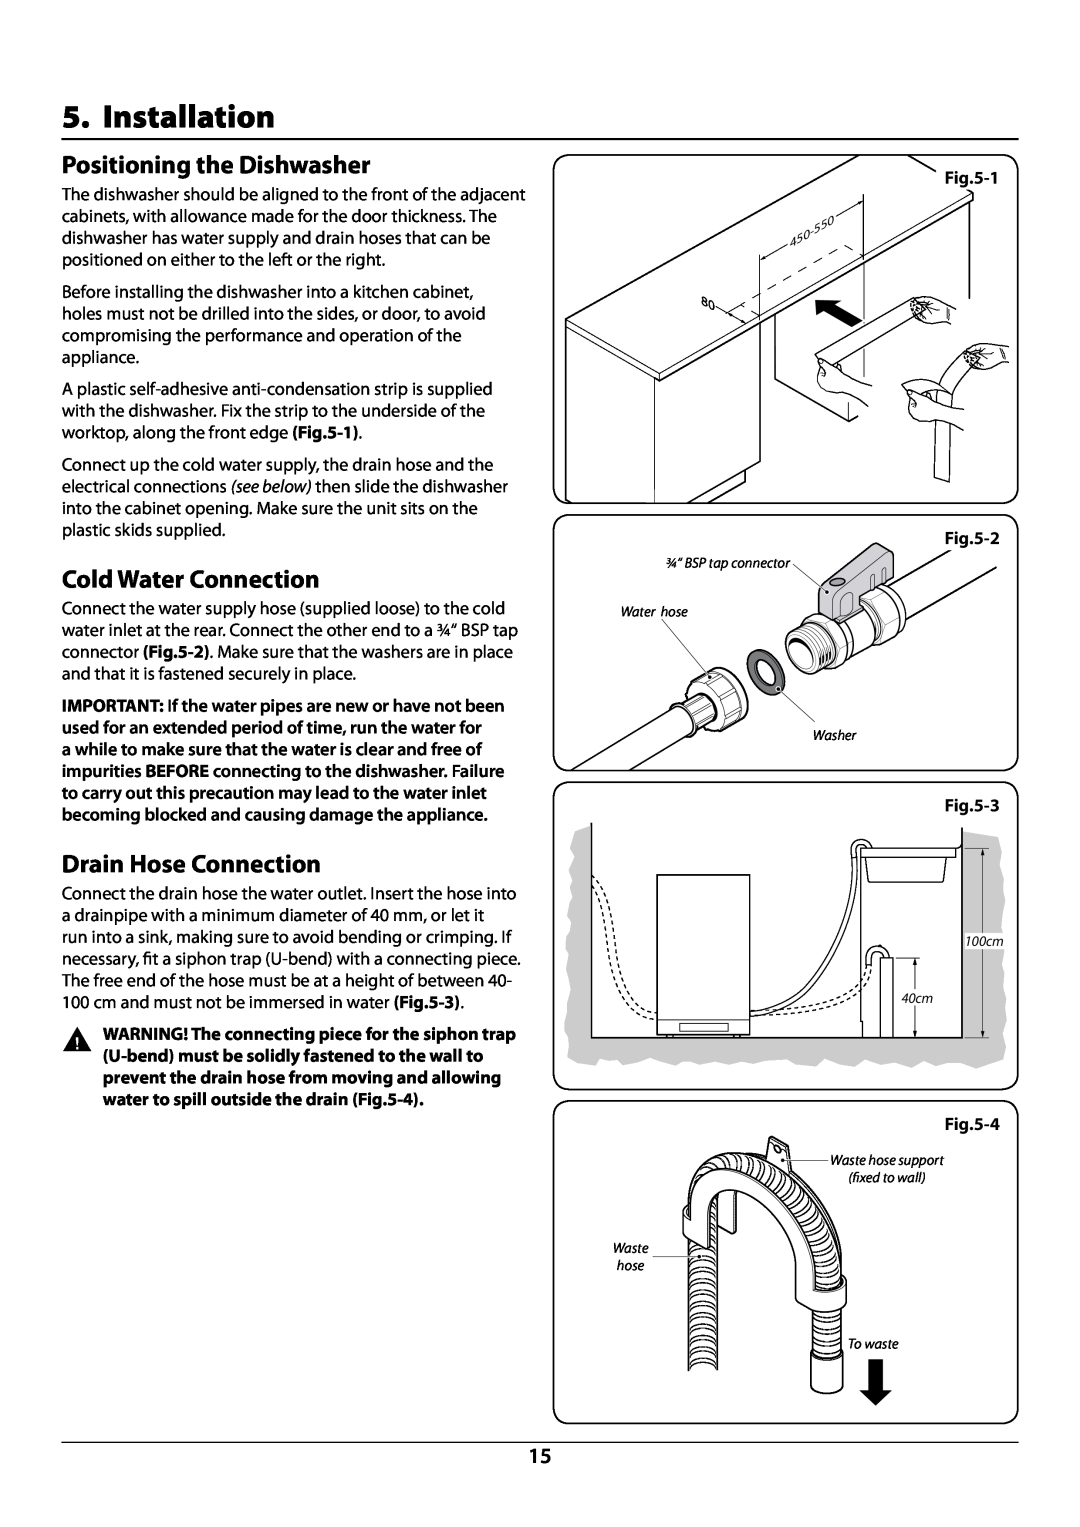 Rangemaster RDW945FI manual Installation, Positioning the Dishwasher, Cold Water Connection, Drain Hose Connection 